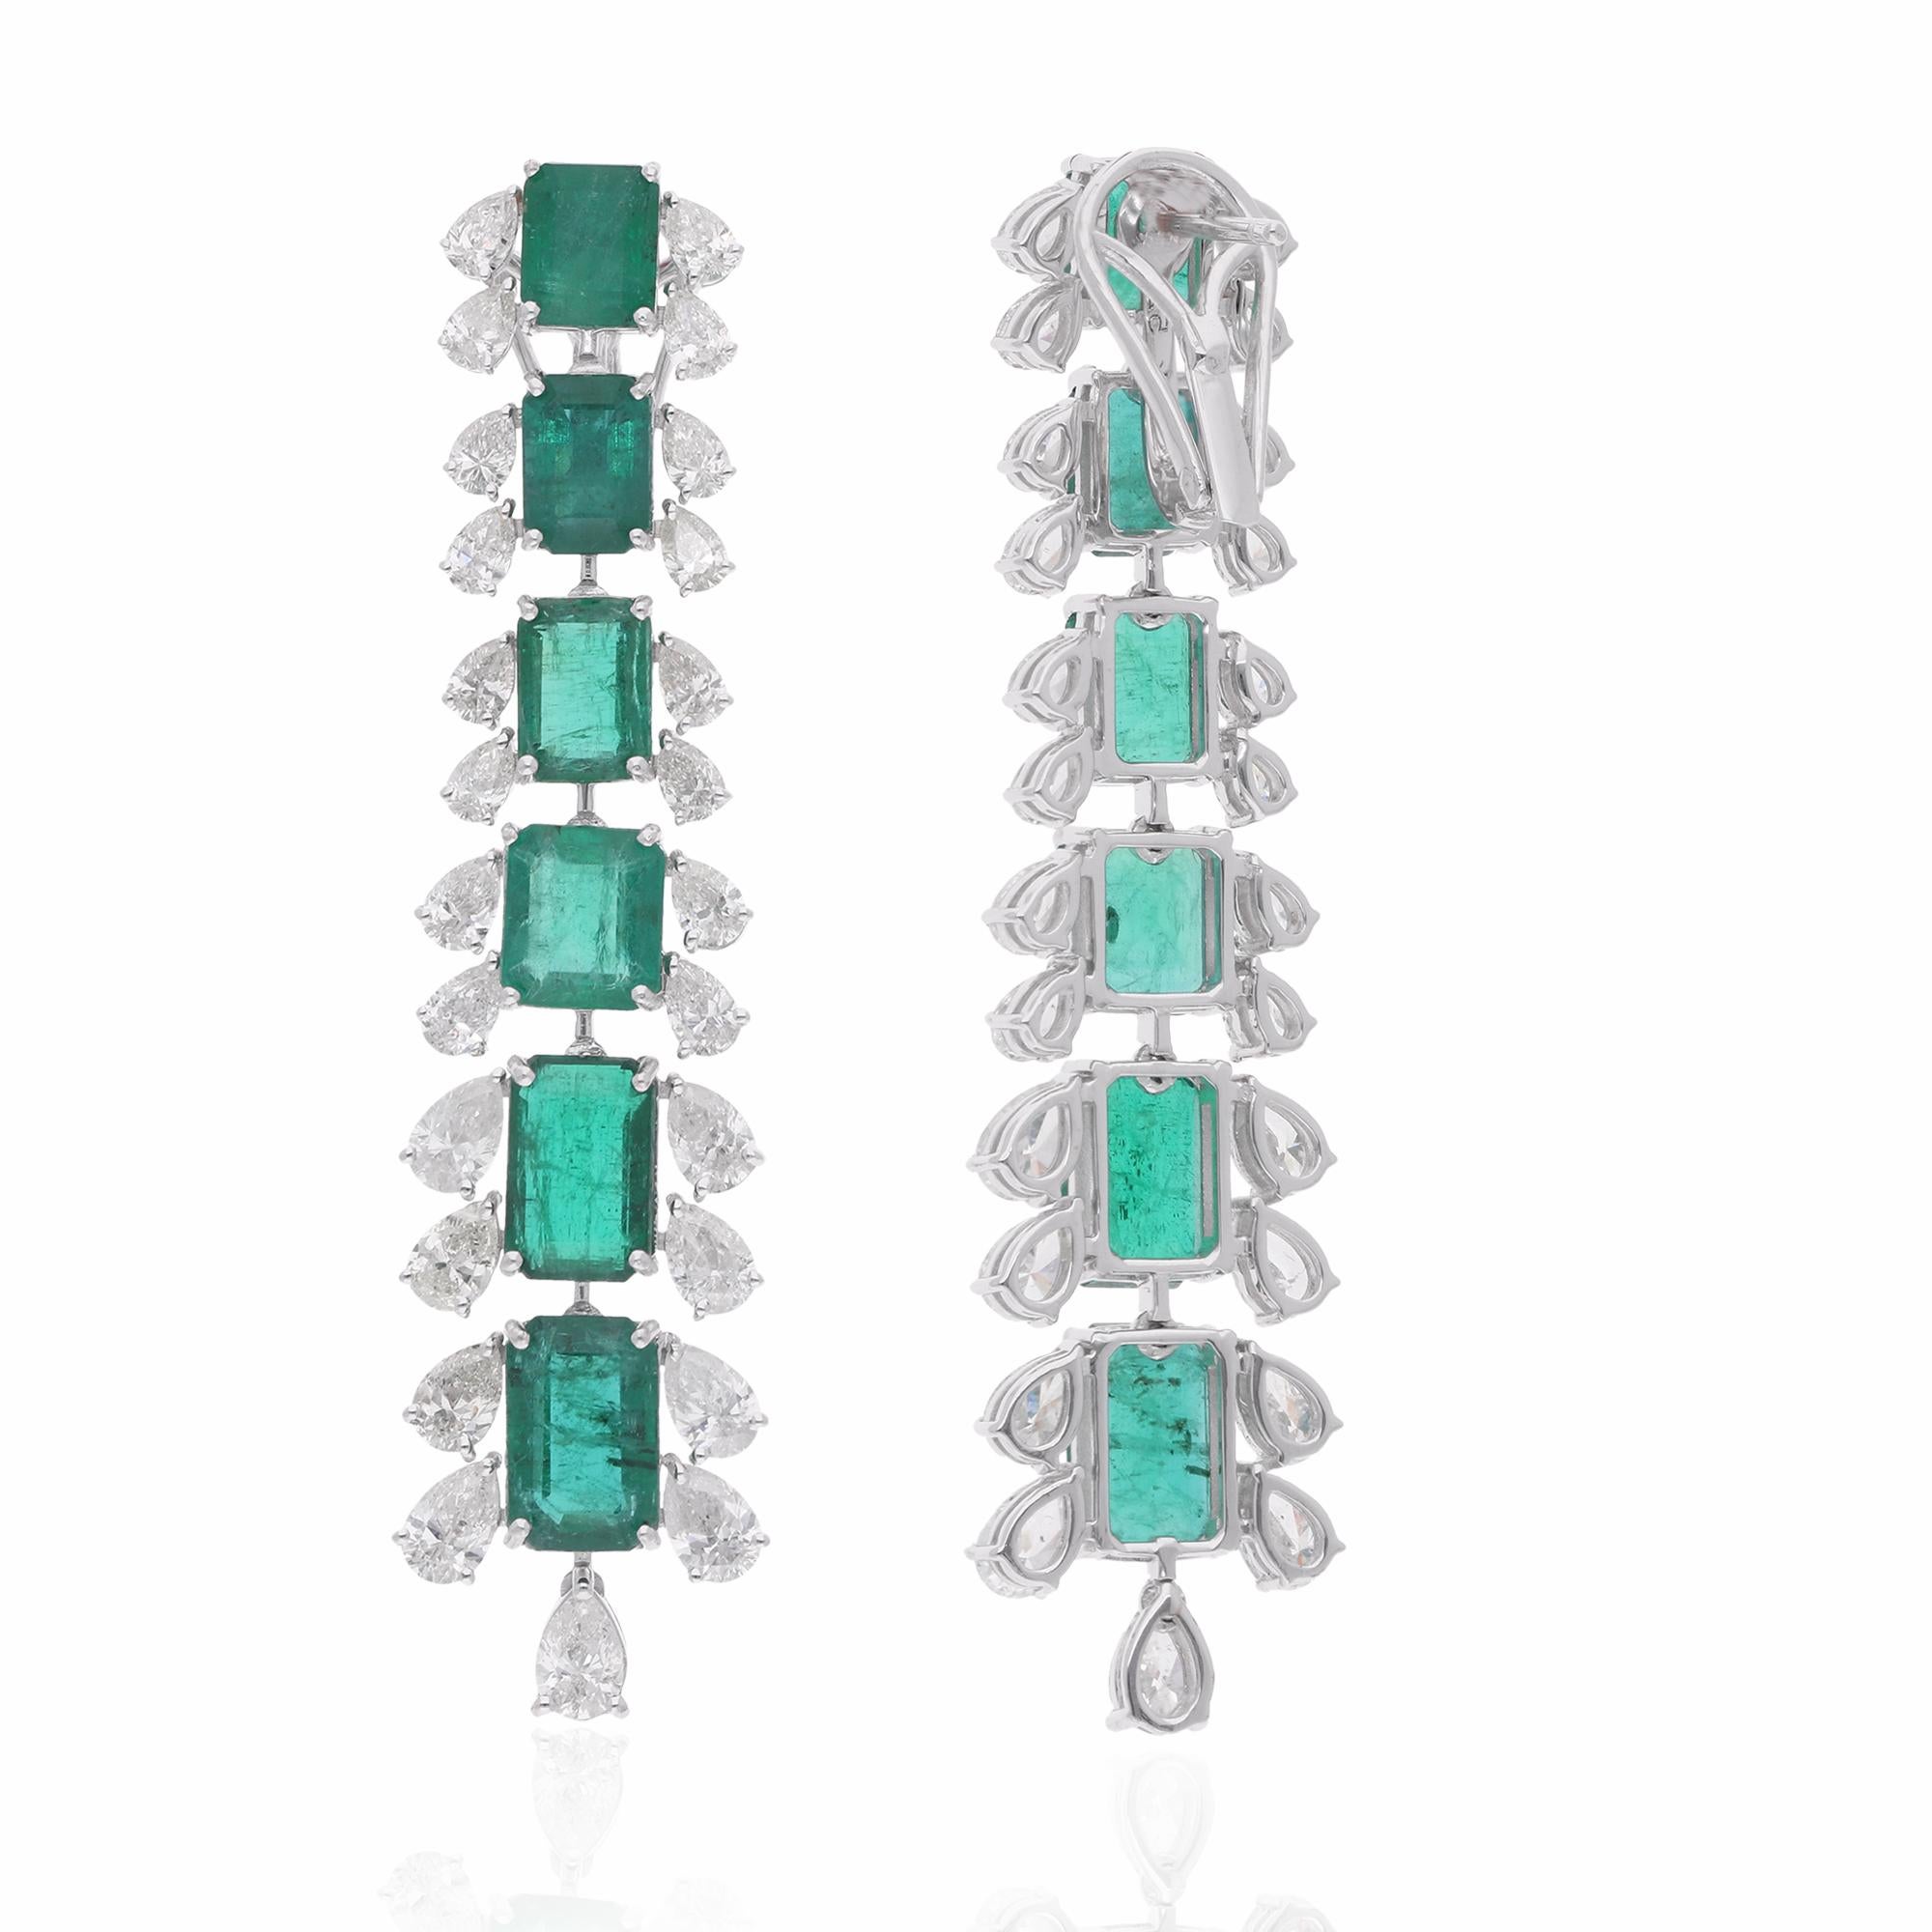 Immerse yourself in the timeless elegance of these Natural Zambian Emerald Gemstone Dangle Earrings, adorned with dazzling Diamonds and meticulously crafted in luxurious 18 Karat White Gold. These exquisite earrings are a celebration of